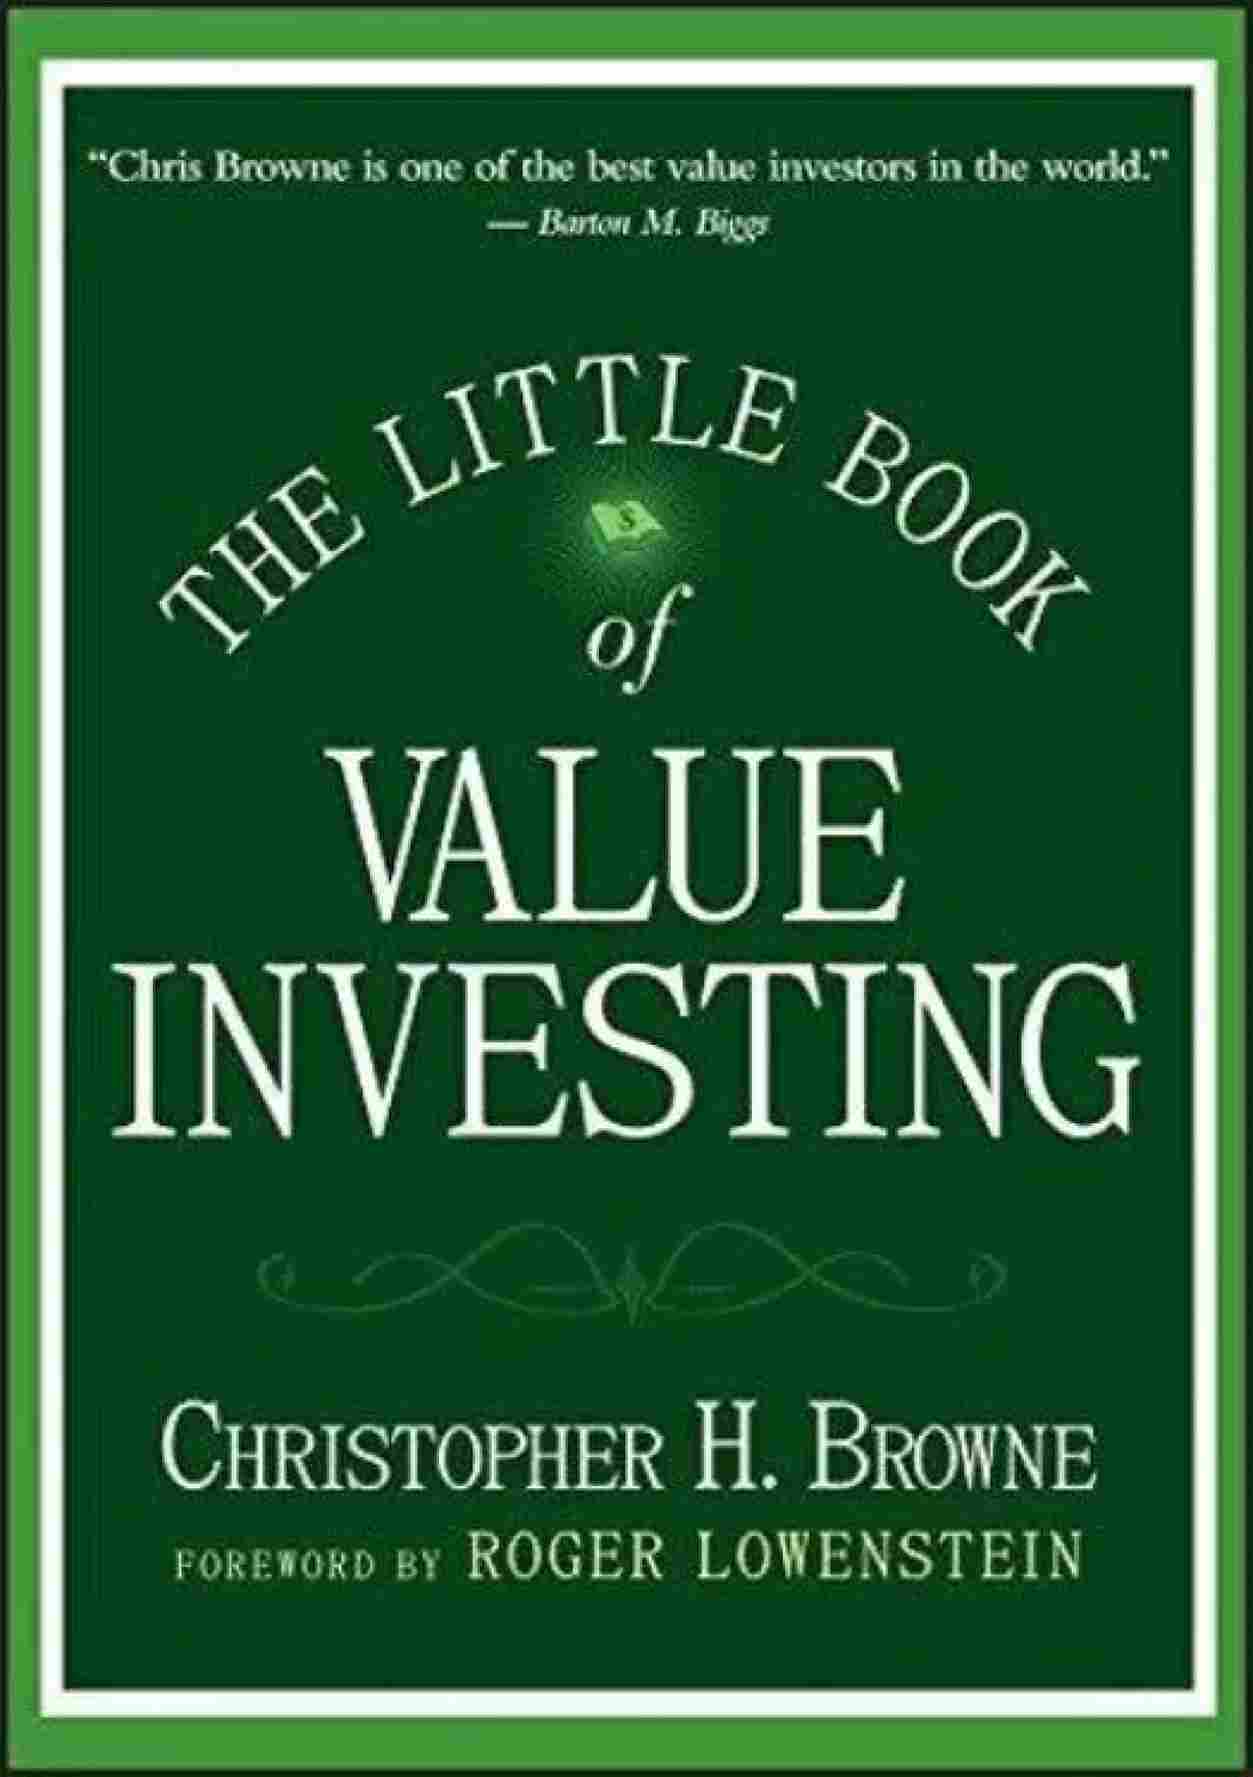 The Little Book of Value Investing (Hardcover) – Christopher H. Browne